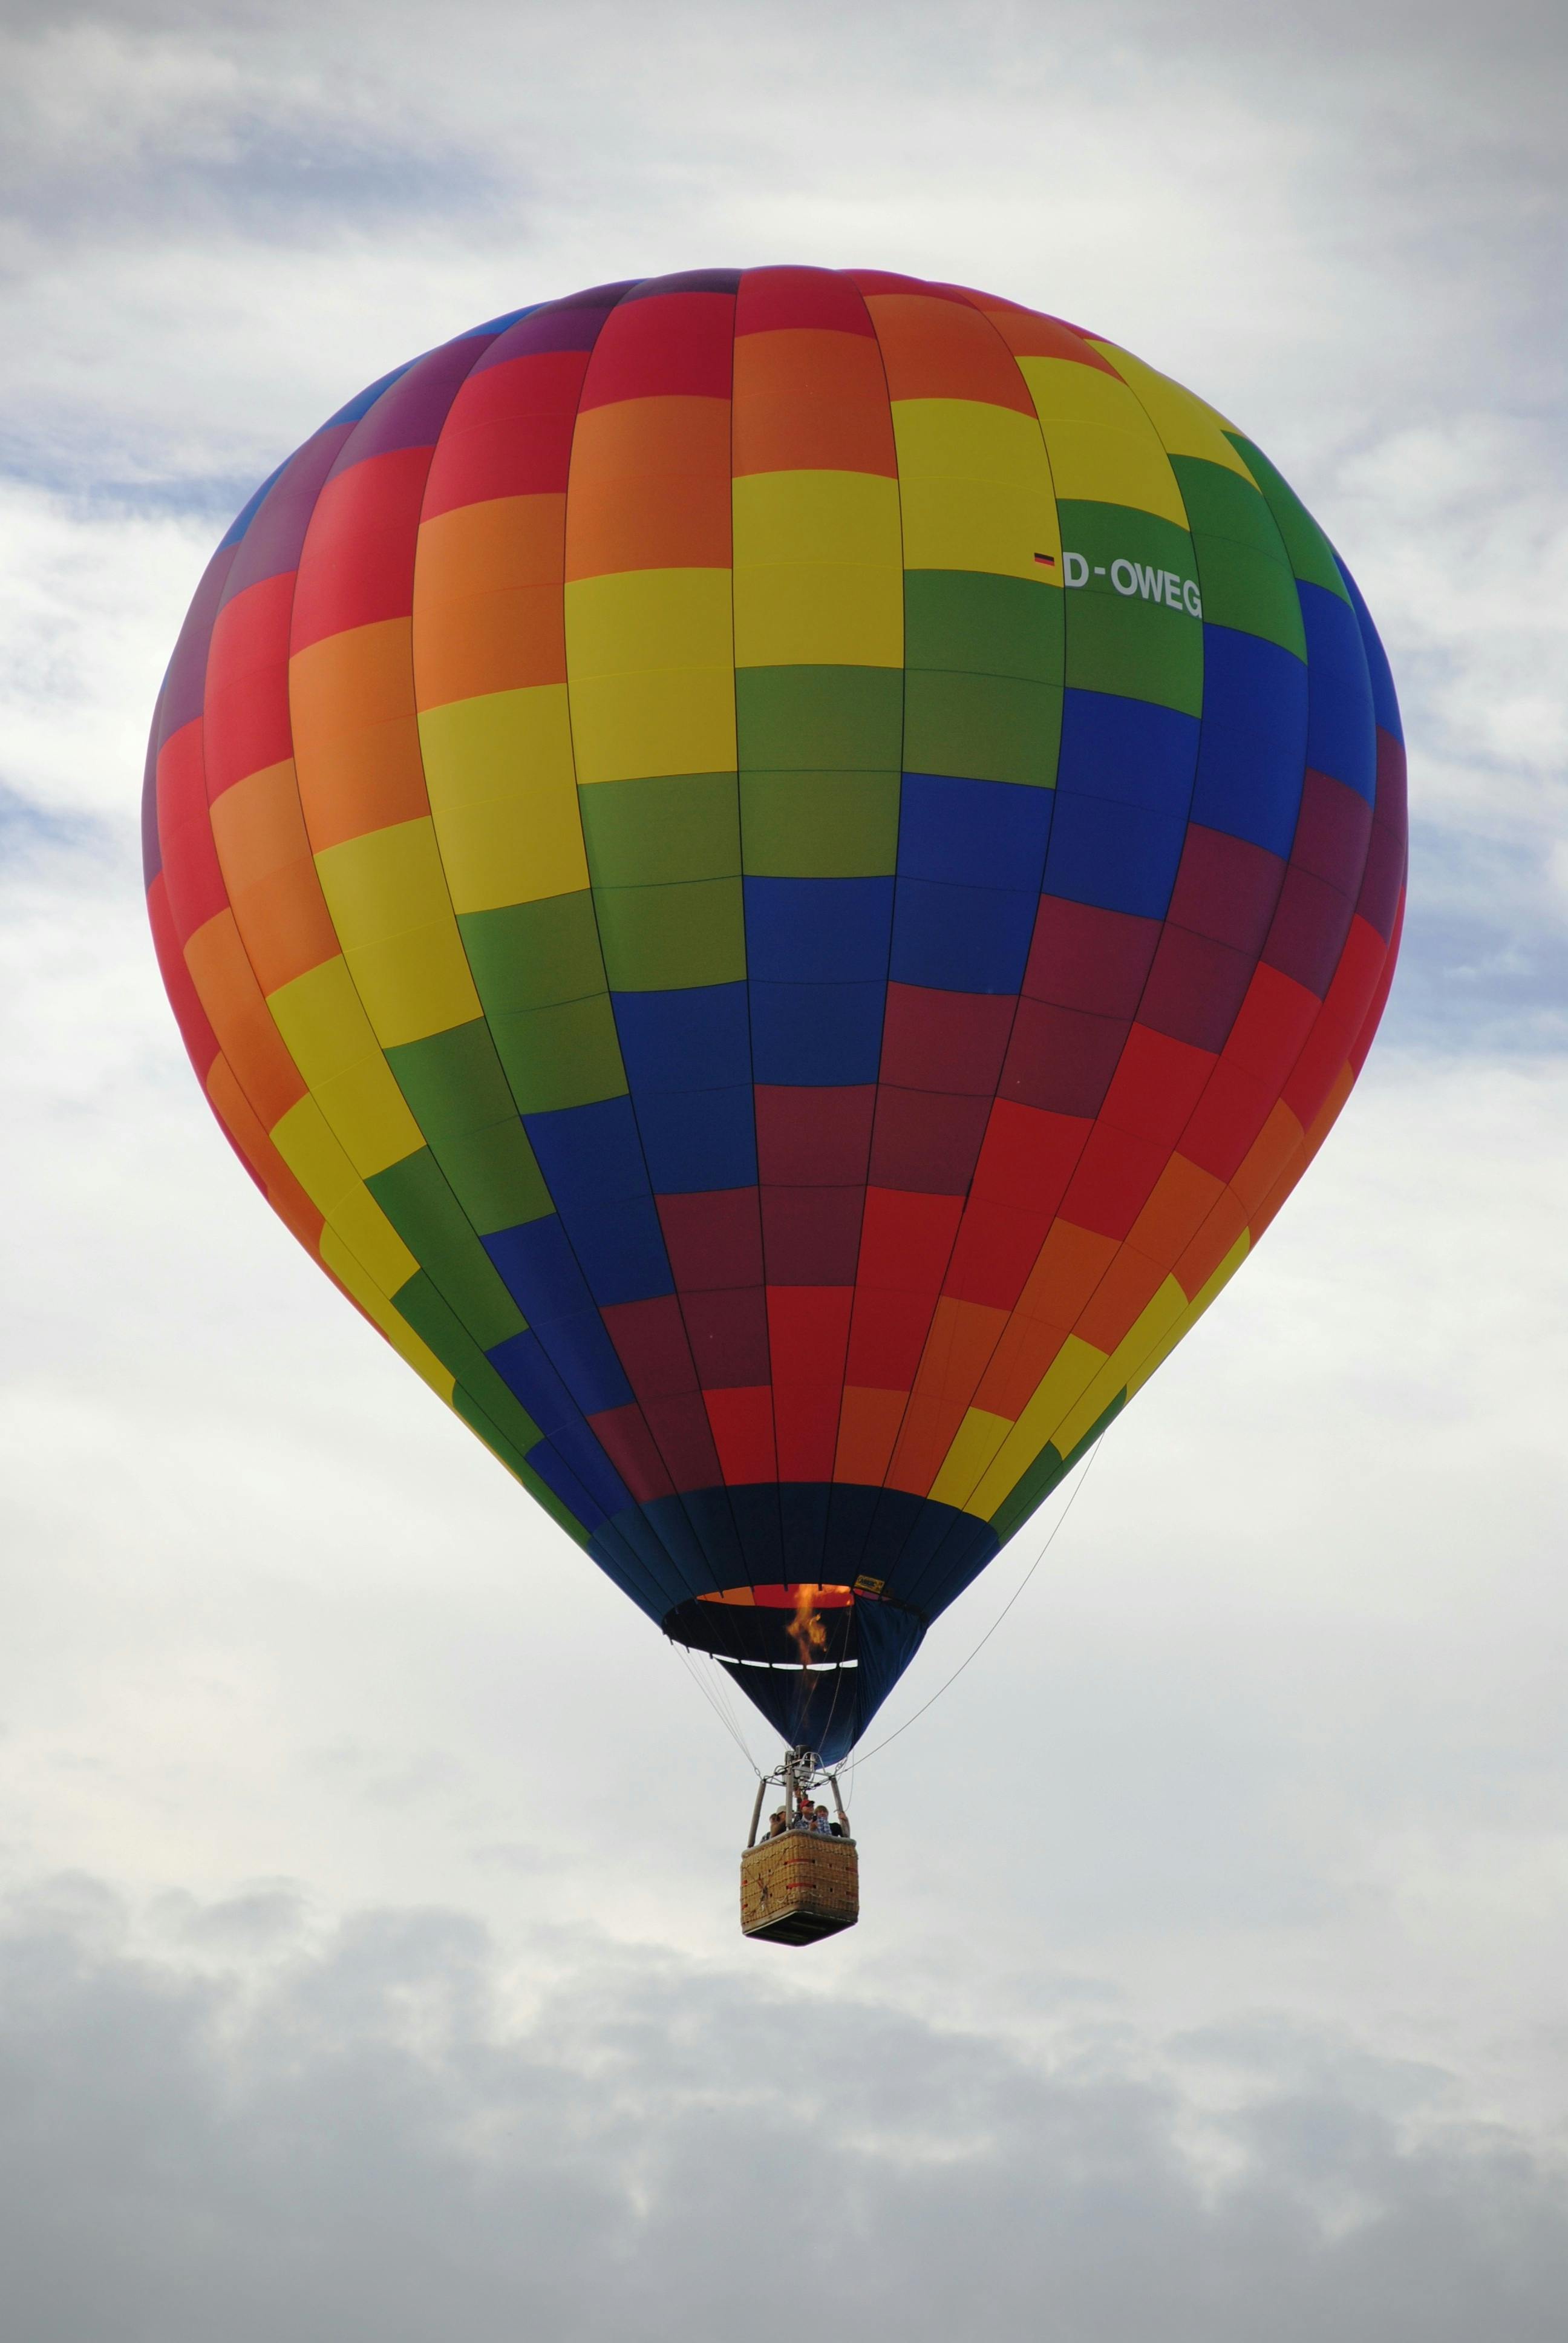 Multi Colored Hot Air Balloon's Grown Shot during Daytime · Free Stock